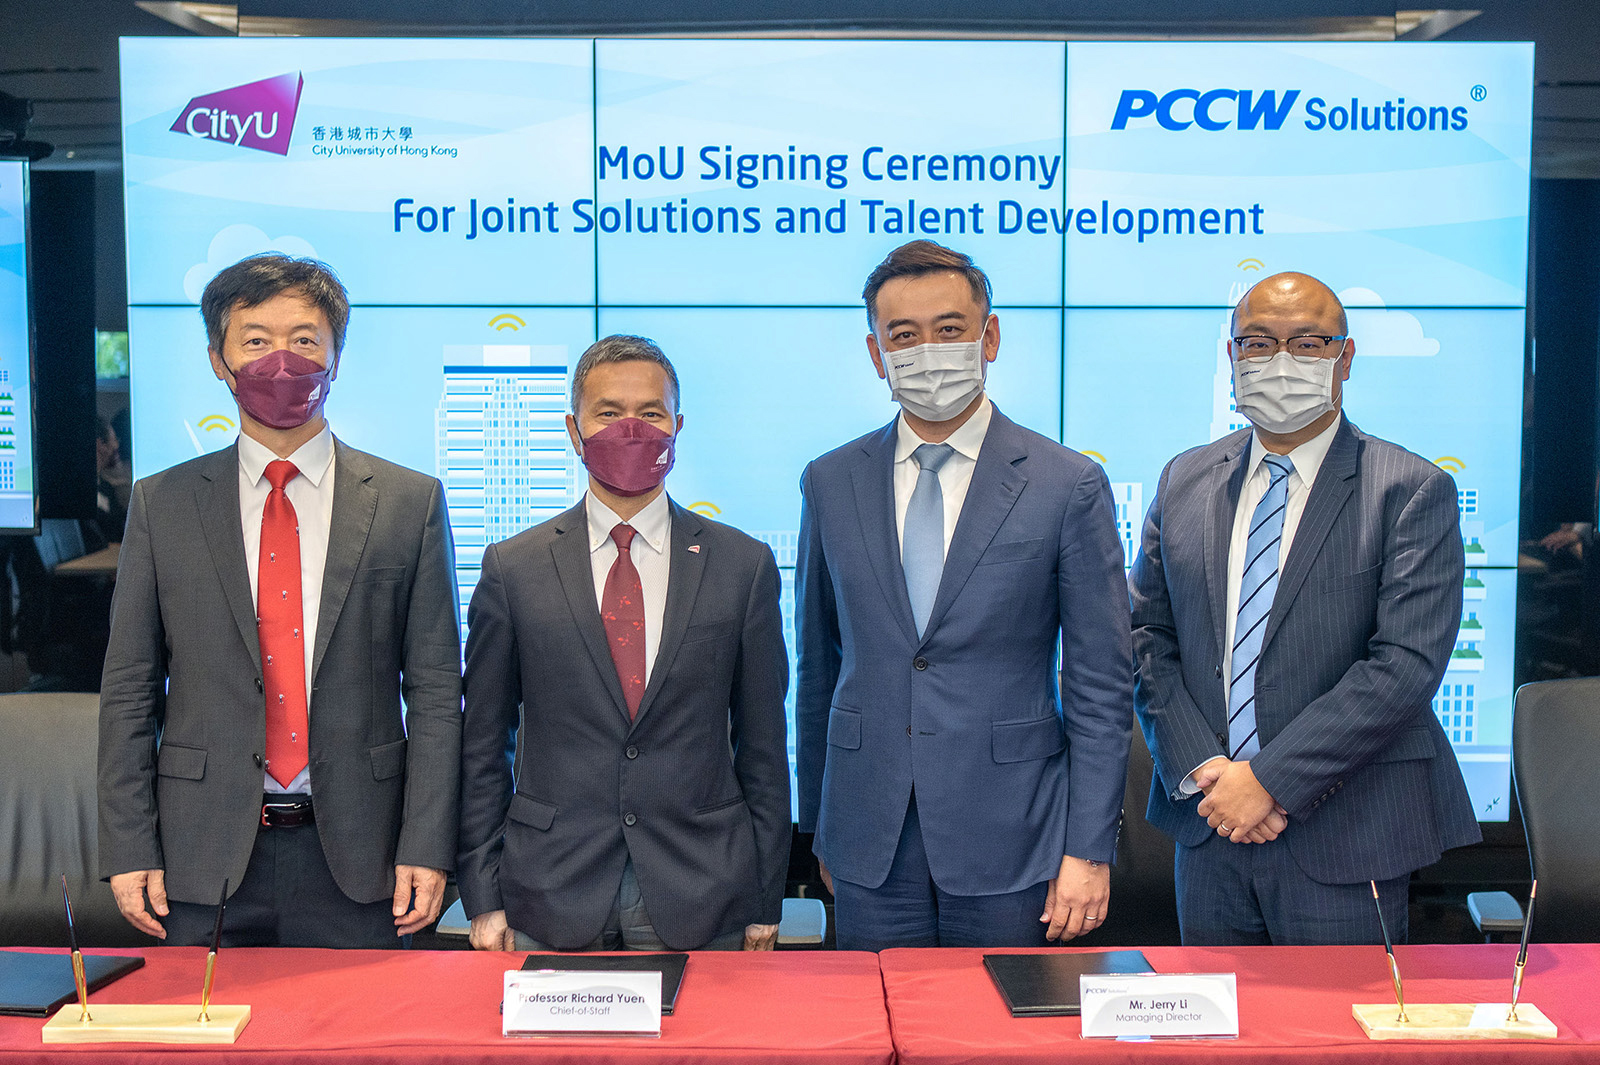 Representatives of CityU and PCCW Solutions at the MoU signing ceremony.